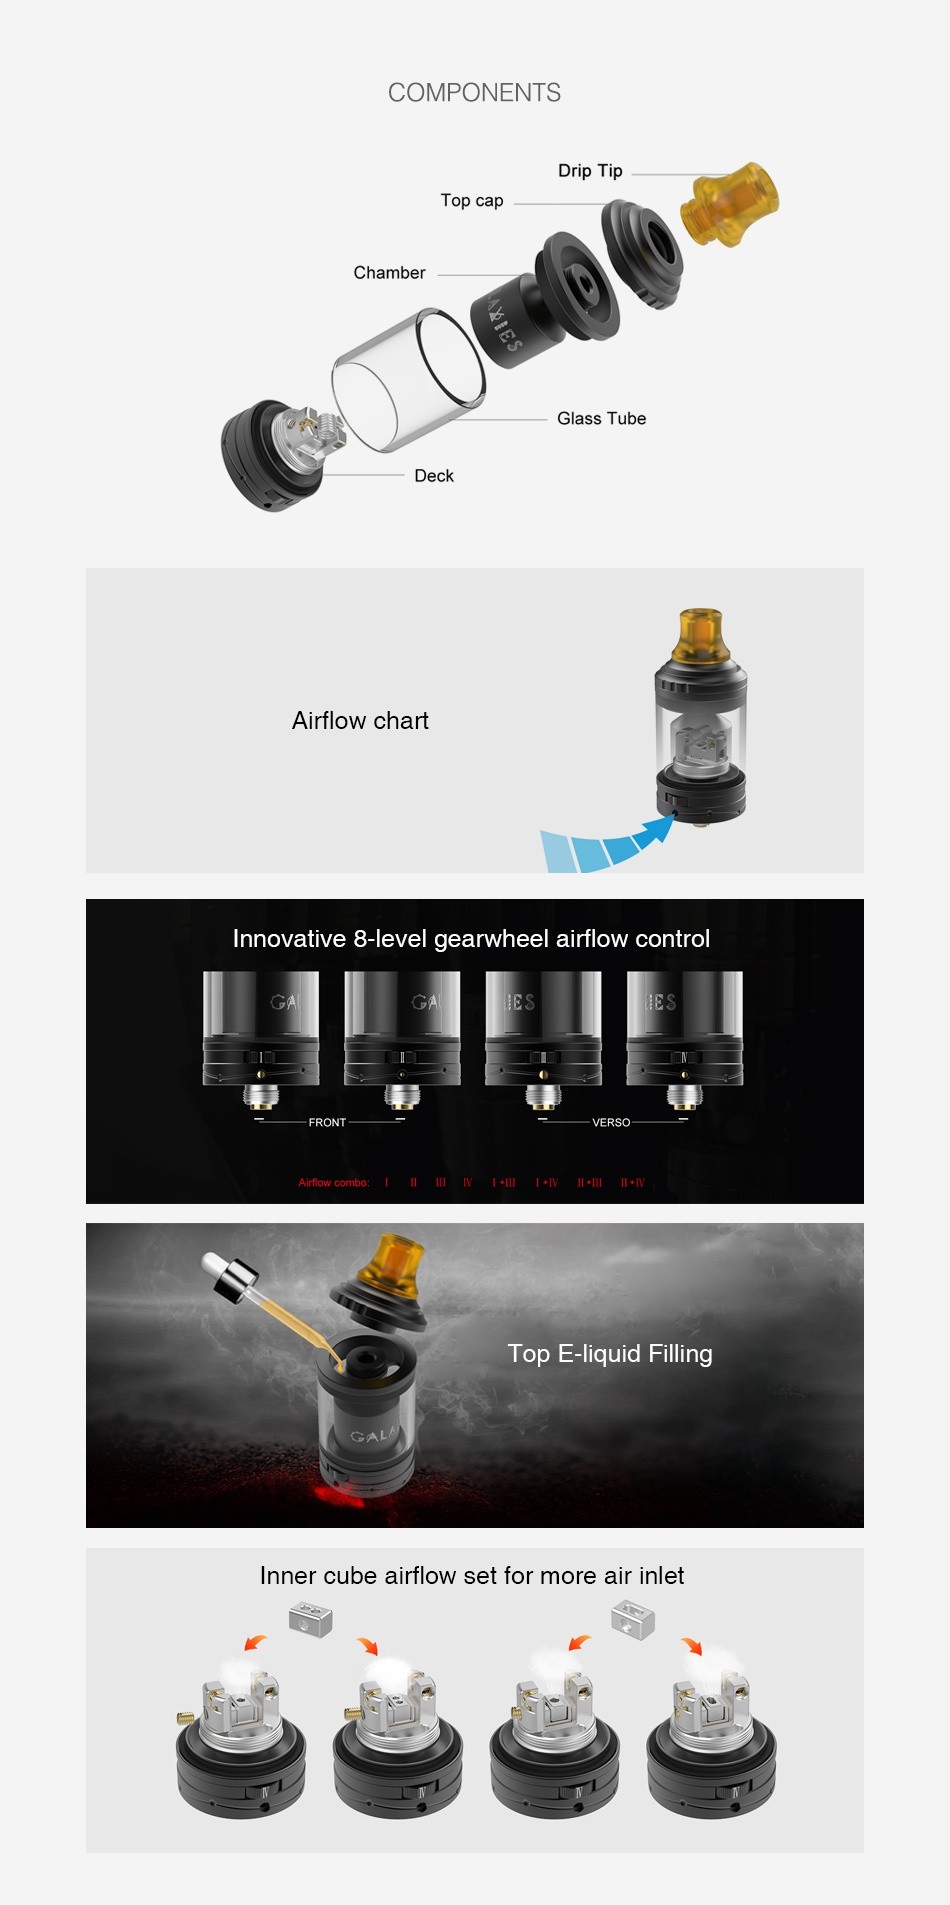 Vapefly Galaxies MTL RTA 2ml/3ml COMPONENTS Drip Tip Top cap Glass Tube Airflow chart Innovative 8 level gearwheel airflow control HES     l  Top E liquid Filling Inner cube airflow set for more air inlet